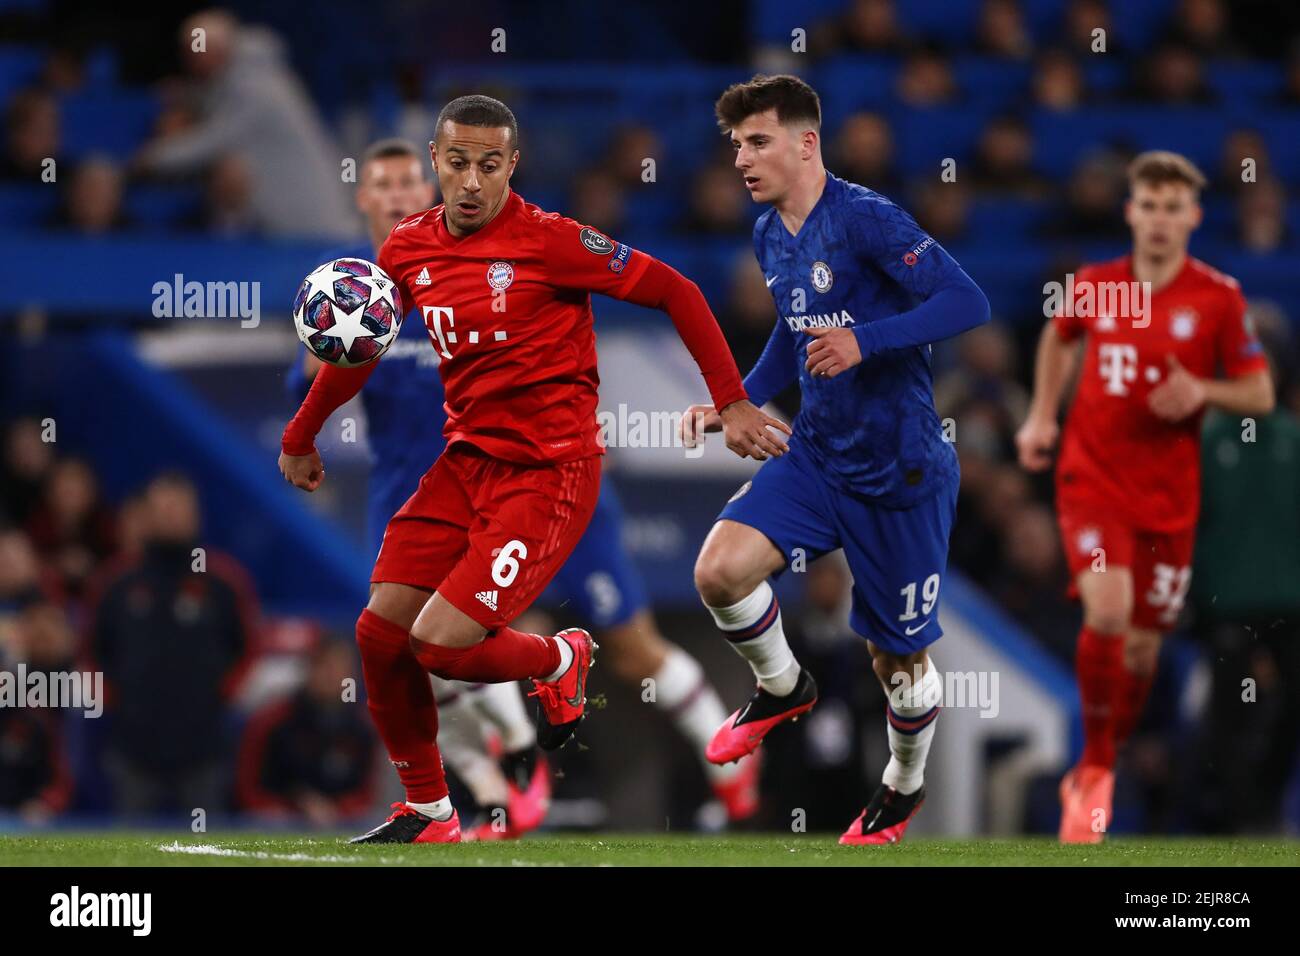 Thiago Alcantara of Bayern Munich and Mason Mount of Chelsea in action  during the UEFA Champions League – Round 16 First Leg match between Chelsea  and Bayern Munich at Stamford Bridge. Final